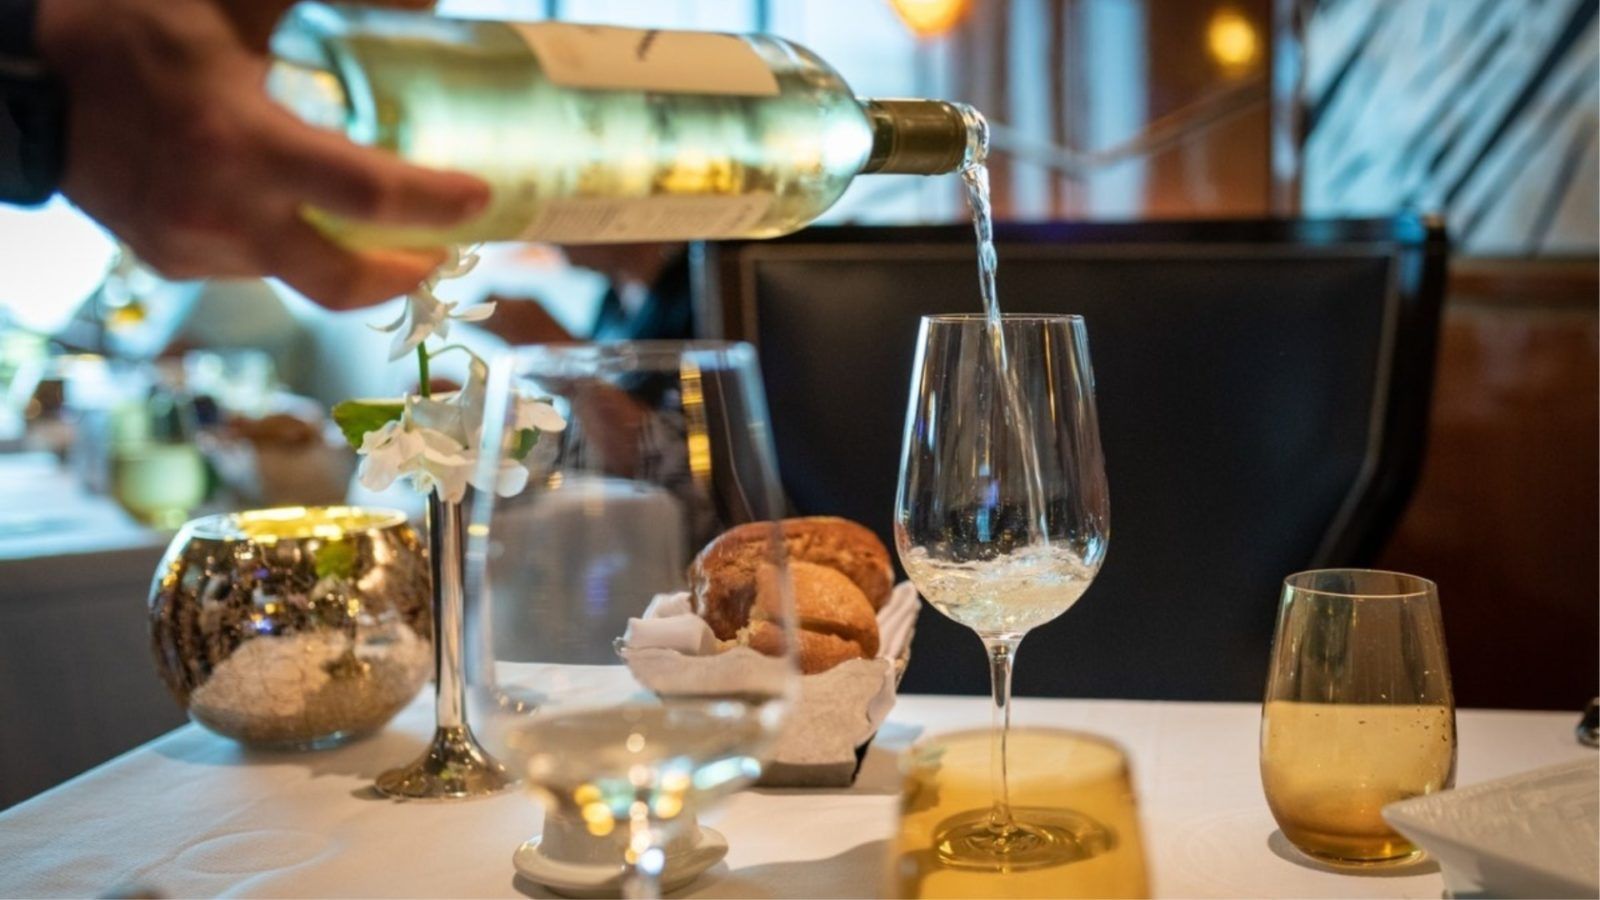 Yes, you can put ice in your white wine. Here’s why